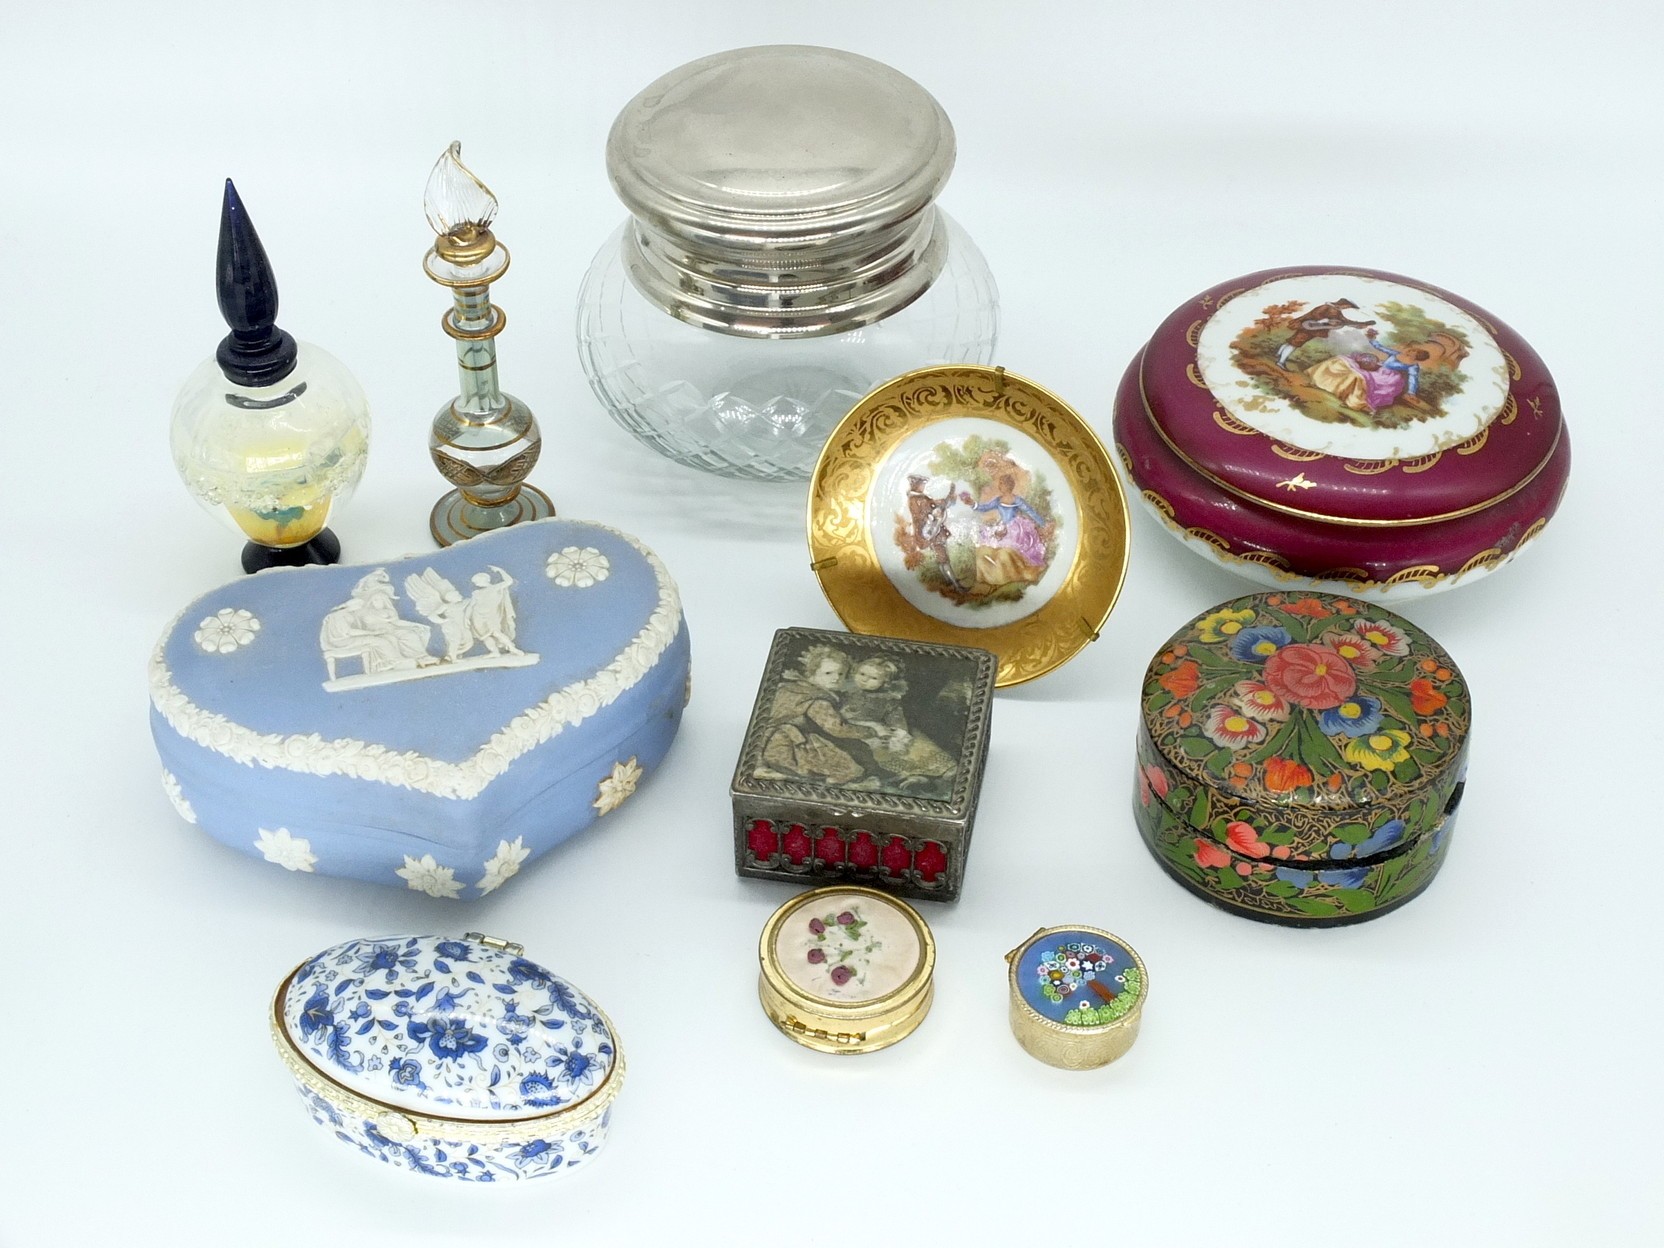 'Group of Jewellery and Trinket Boxes, Including Wedgwood, Limoges, and More'